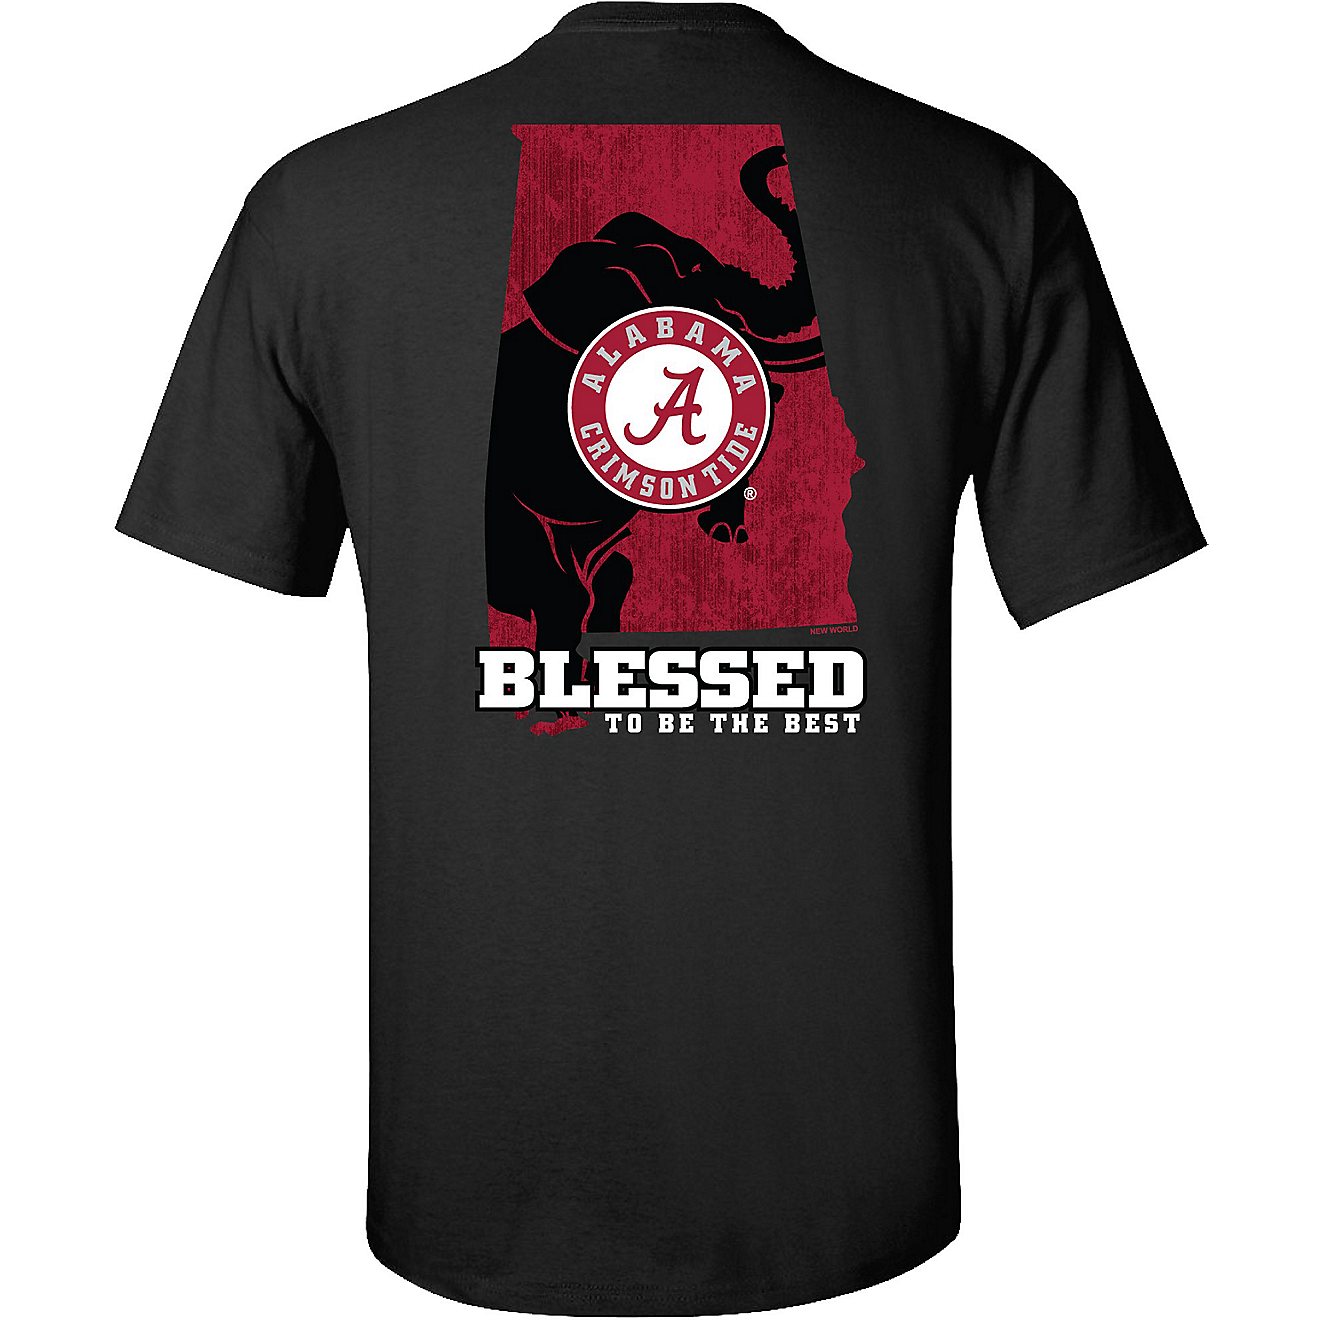 New World Graphics Men's University of Alabama Blessed T-shirt                                                                   - view number 1